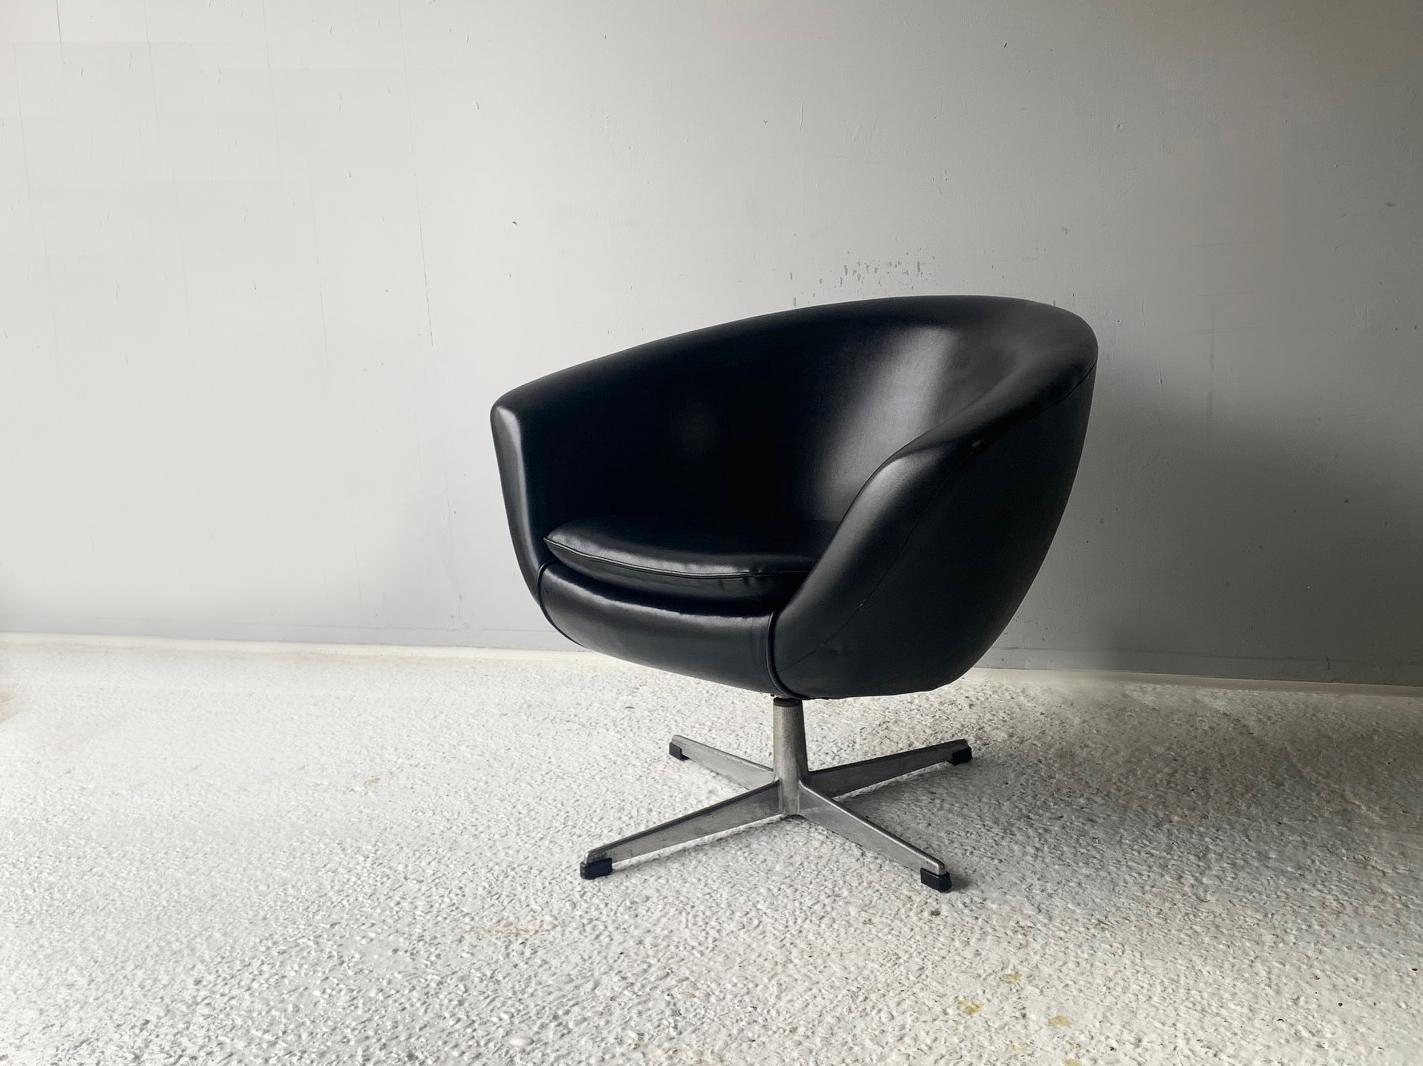 Price listed is for 1 chair only. Total of 2 hairs available can bought individually or as a pair.

Overman International have been making stylish, comfortable furniture since 1977 and are still trading. Classic Vintage Overman pieces are becoming